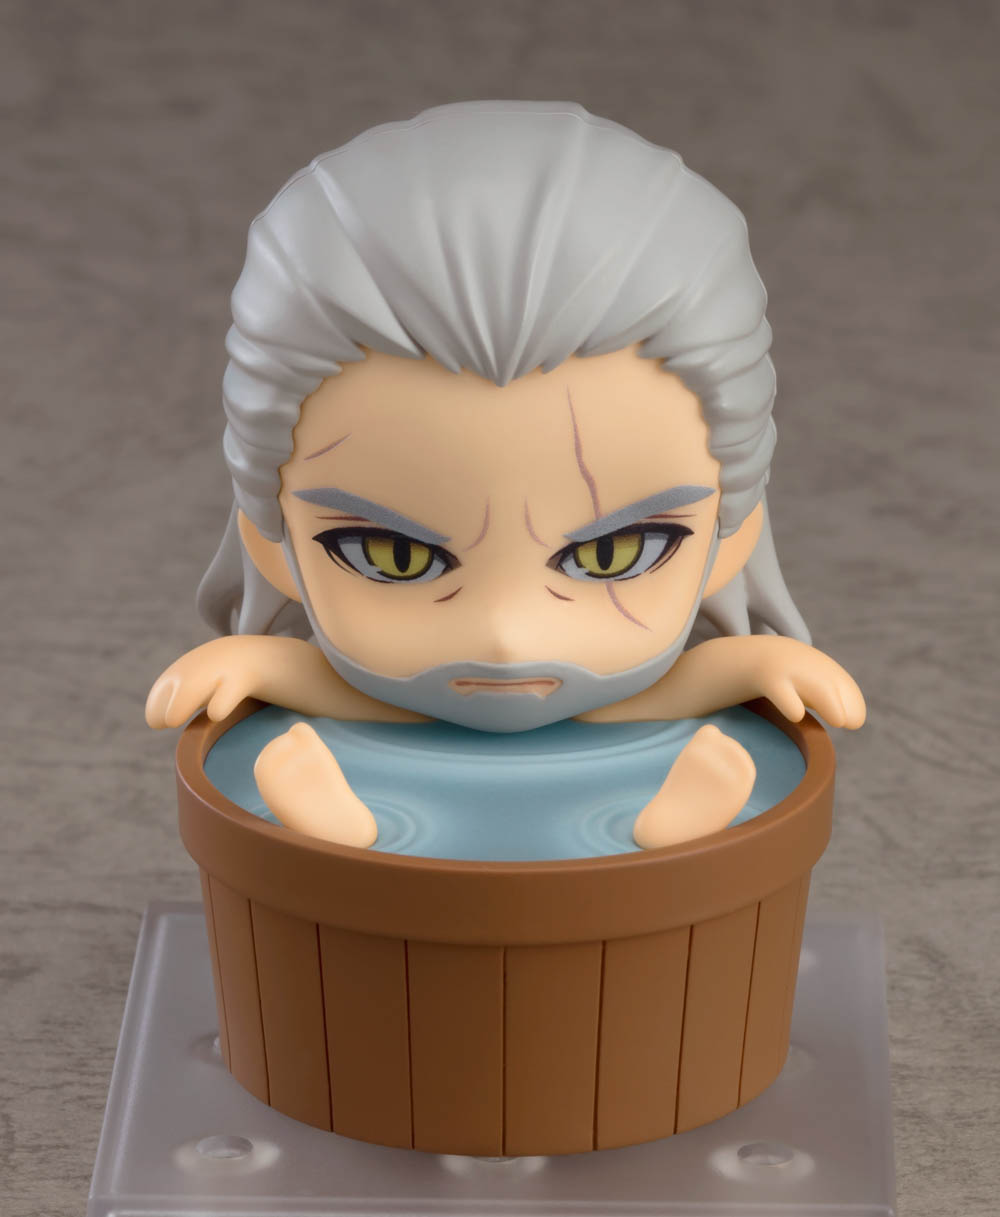 GSC Nendoroid Geralt - The Witcher Collectable